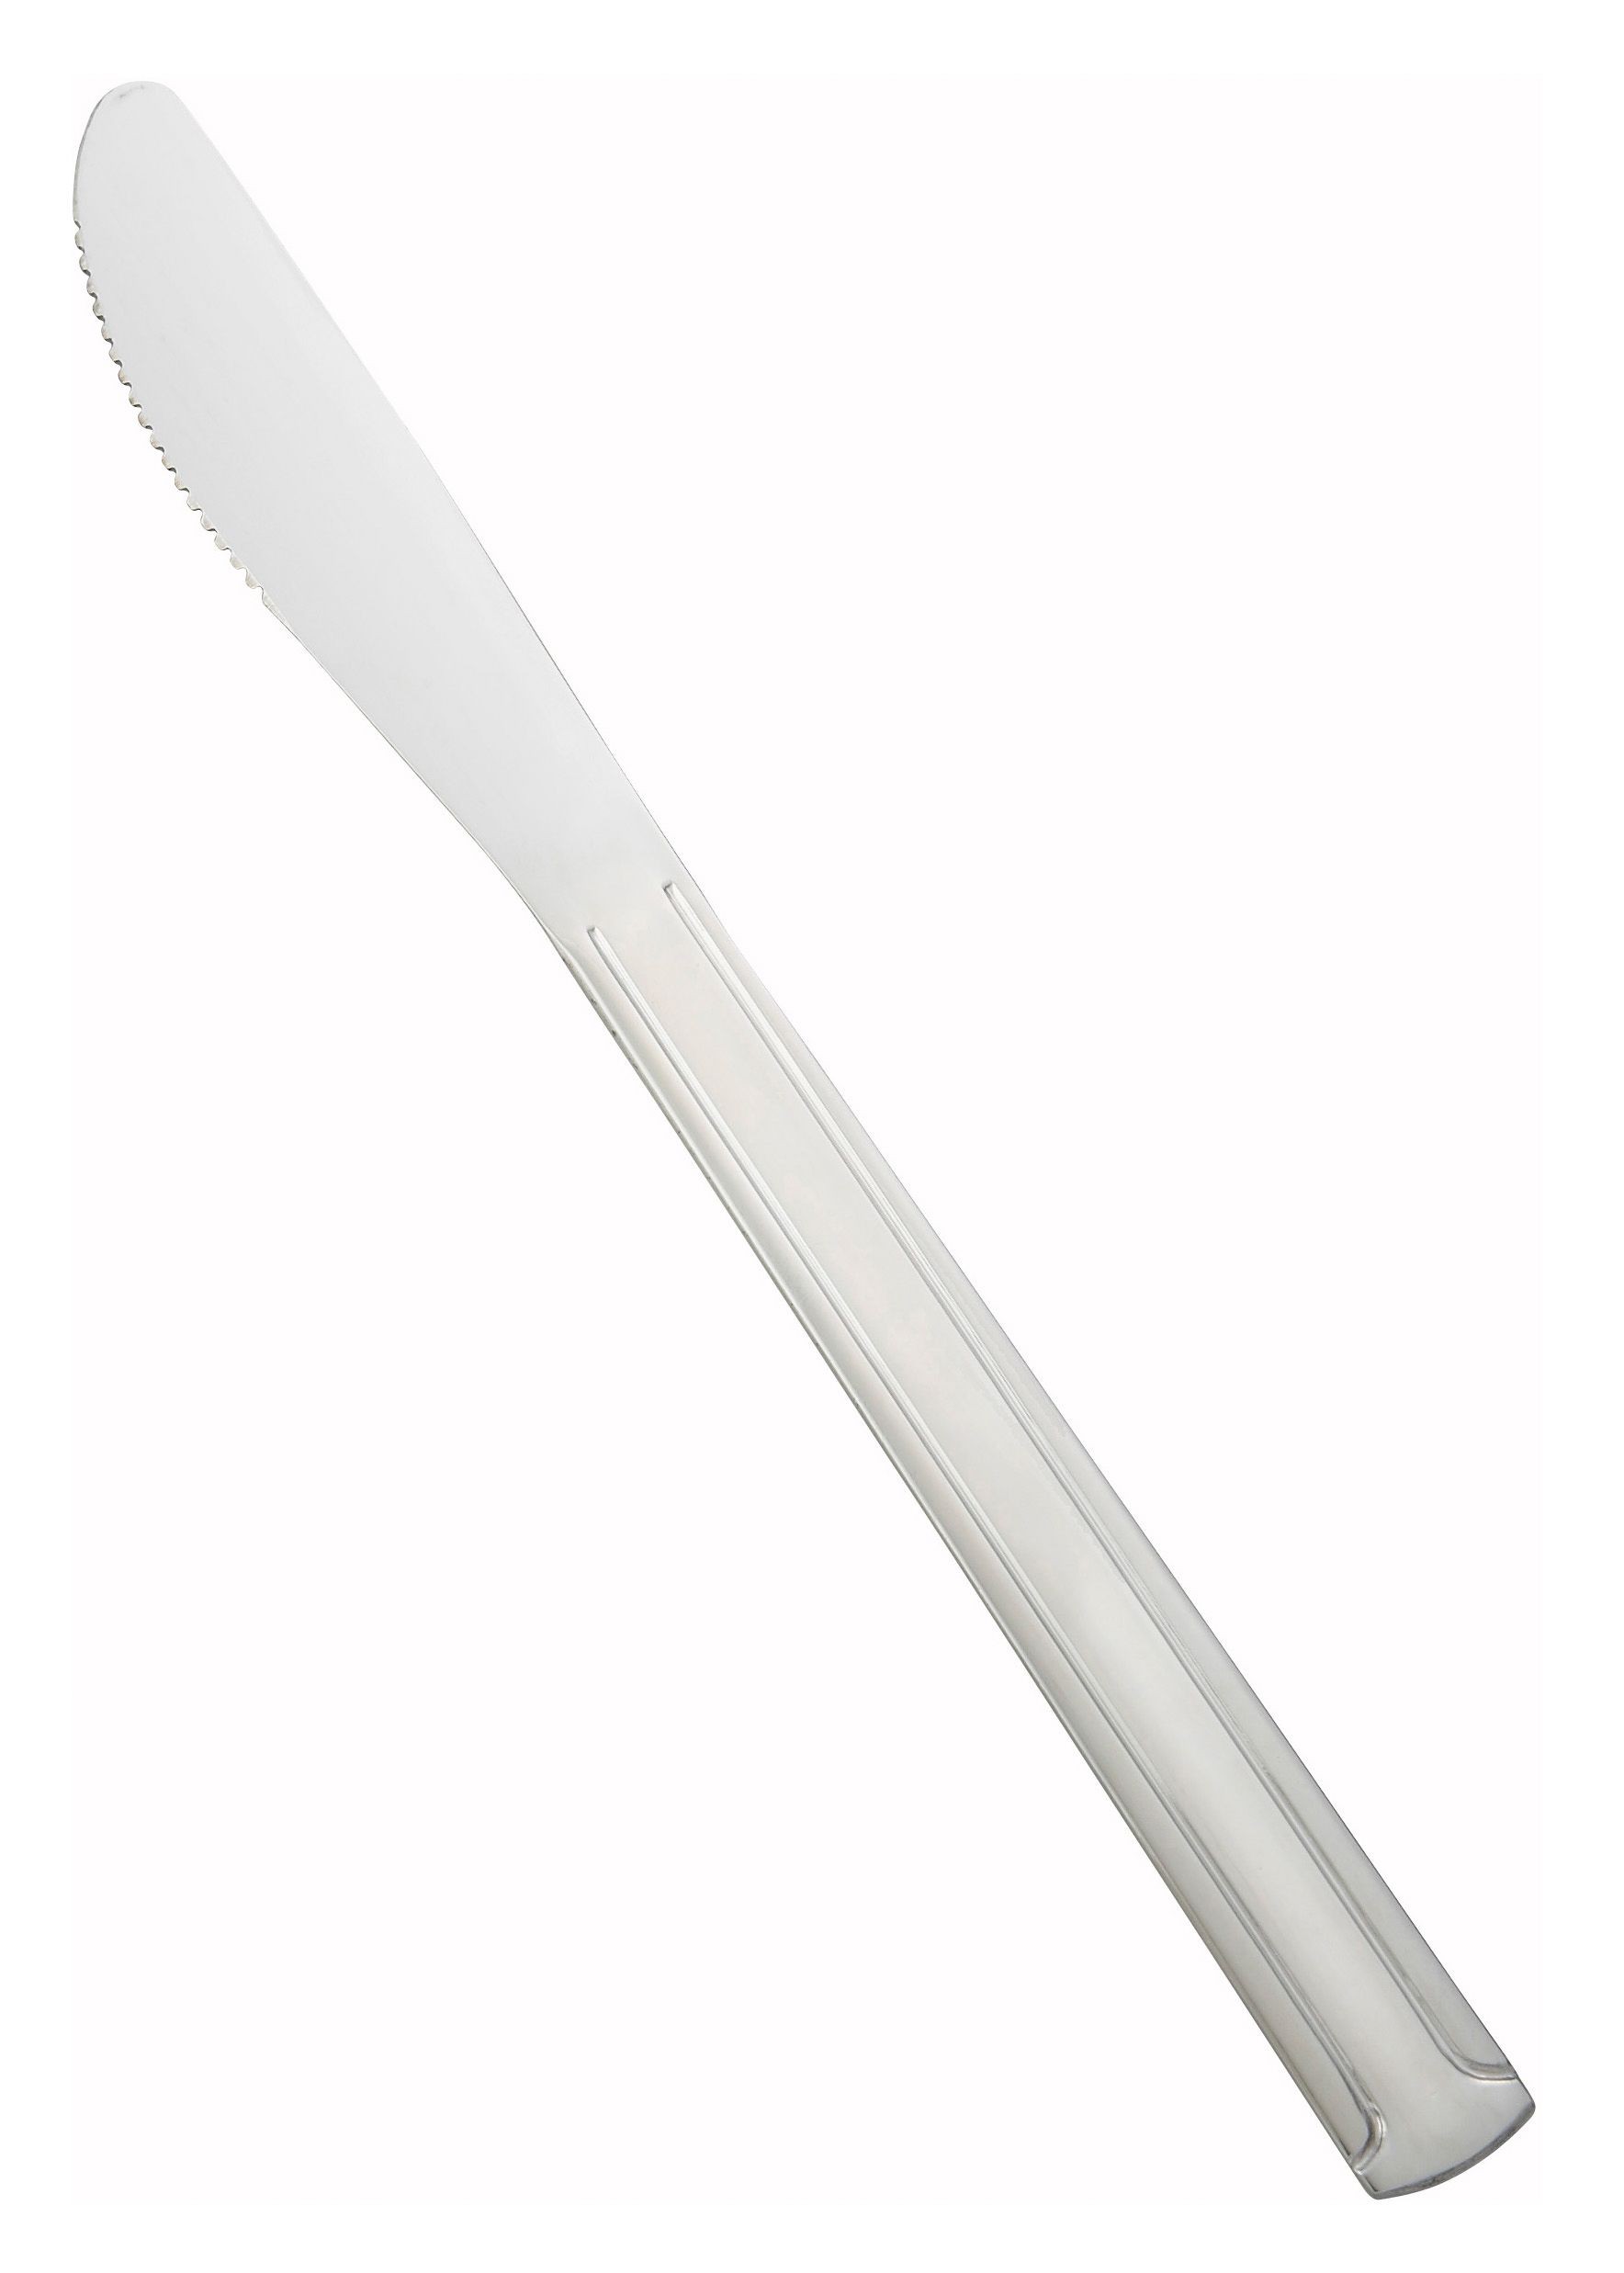 Winco 0001-08 Dominion Medium Weight 18/0 Stainless Steel Dinner Knife (12/Pack)